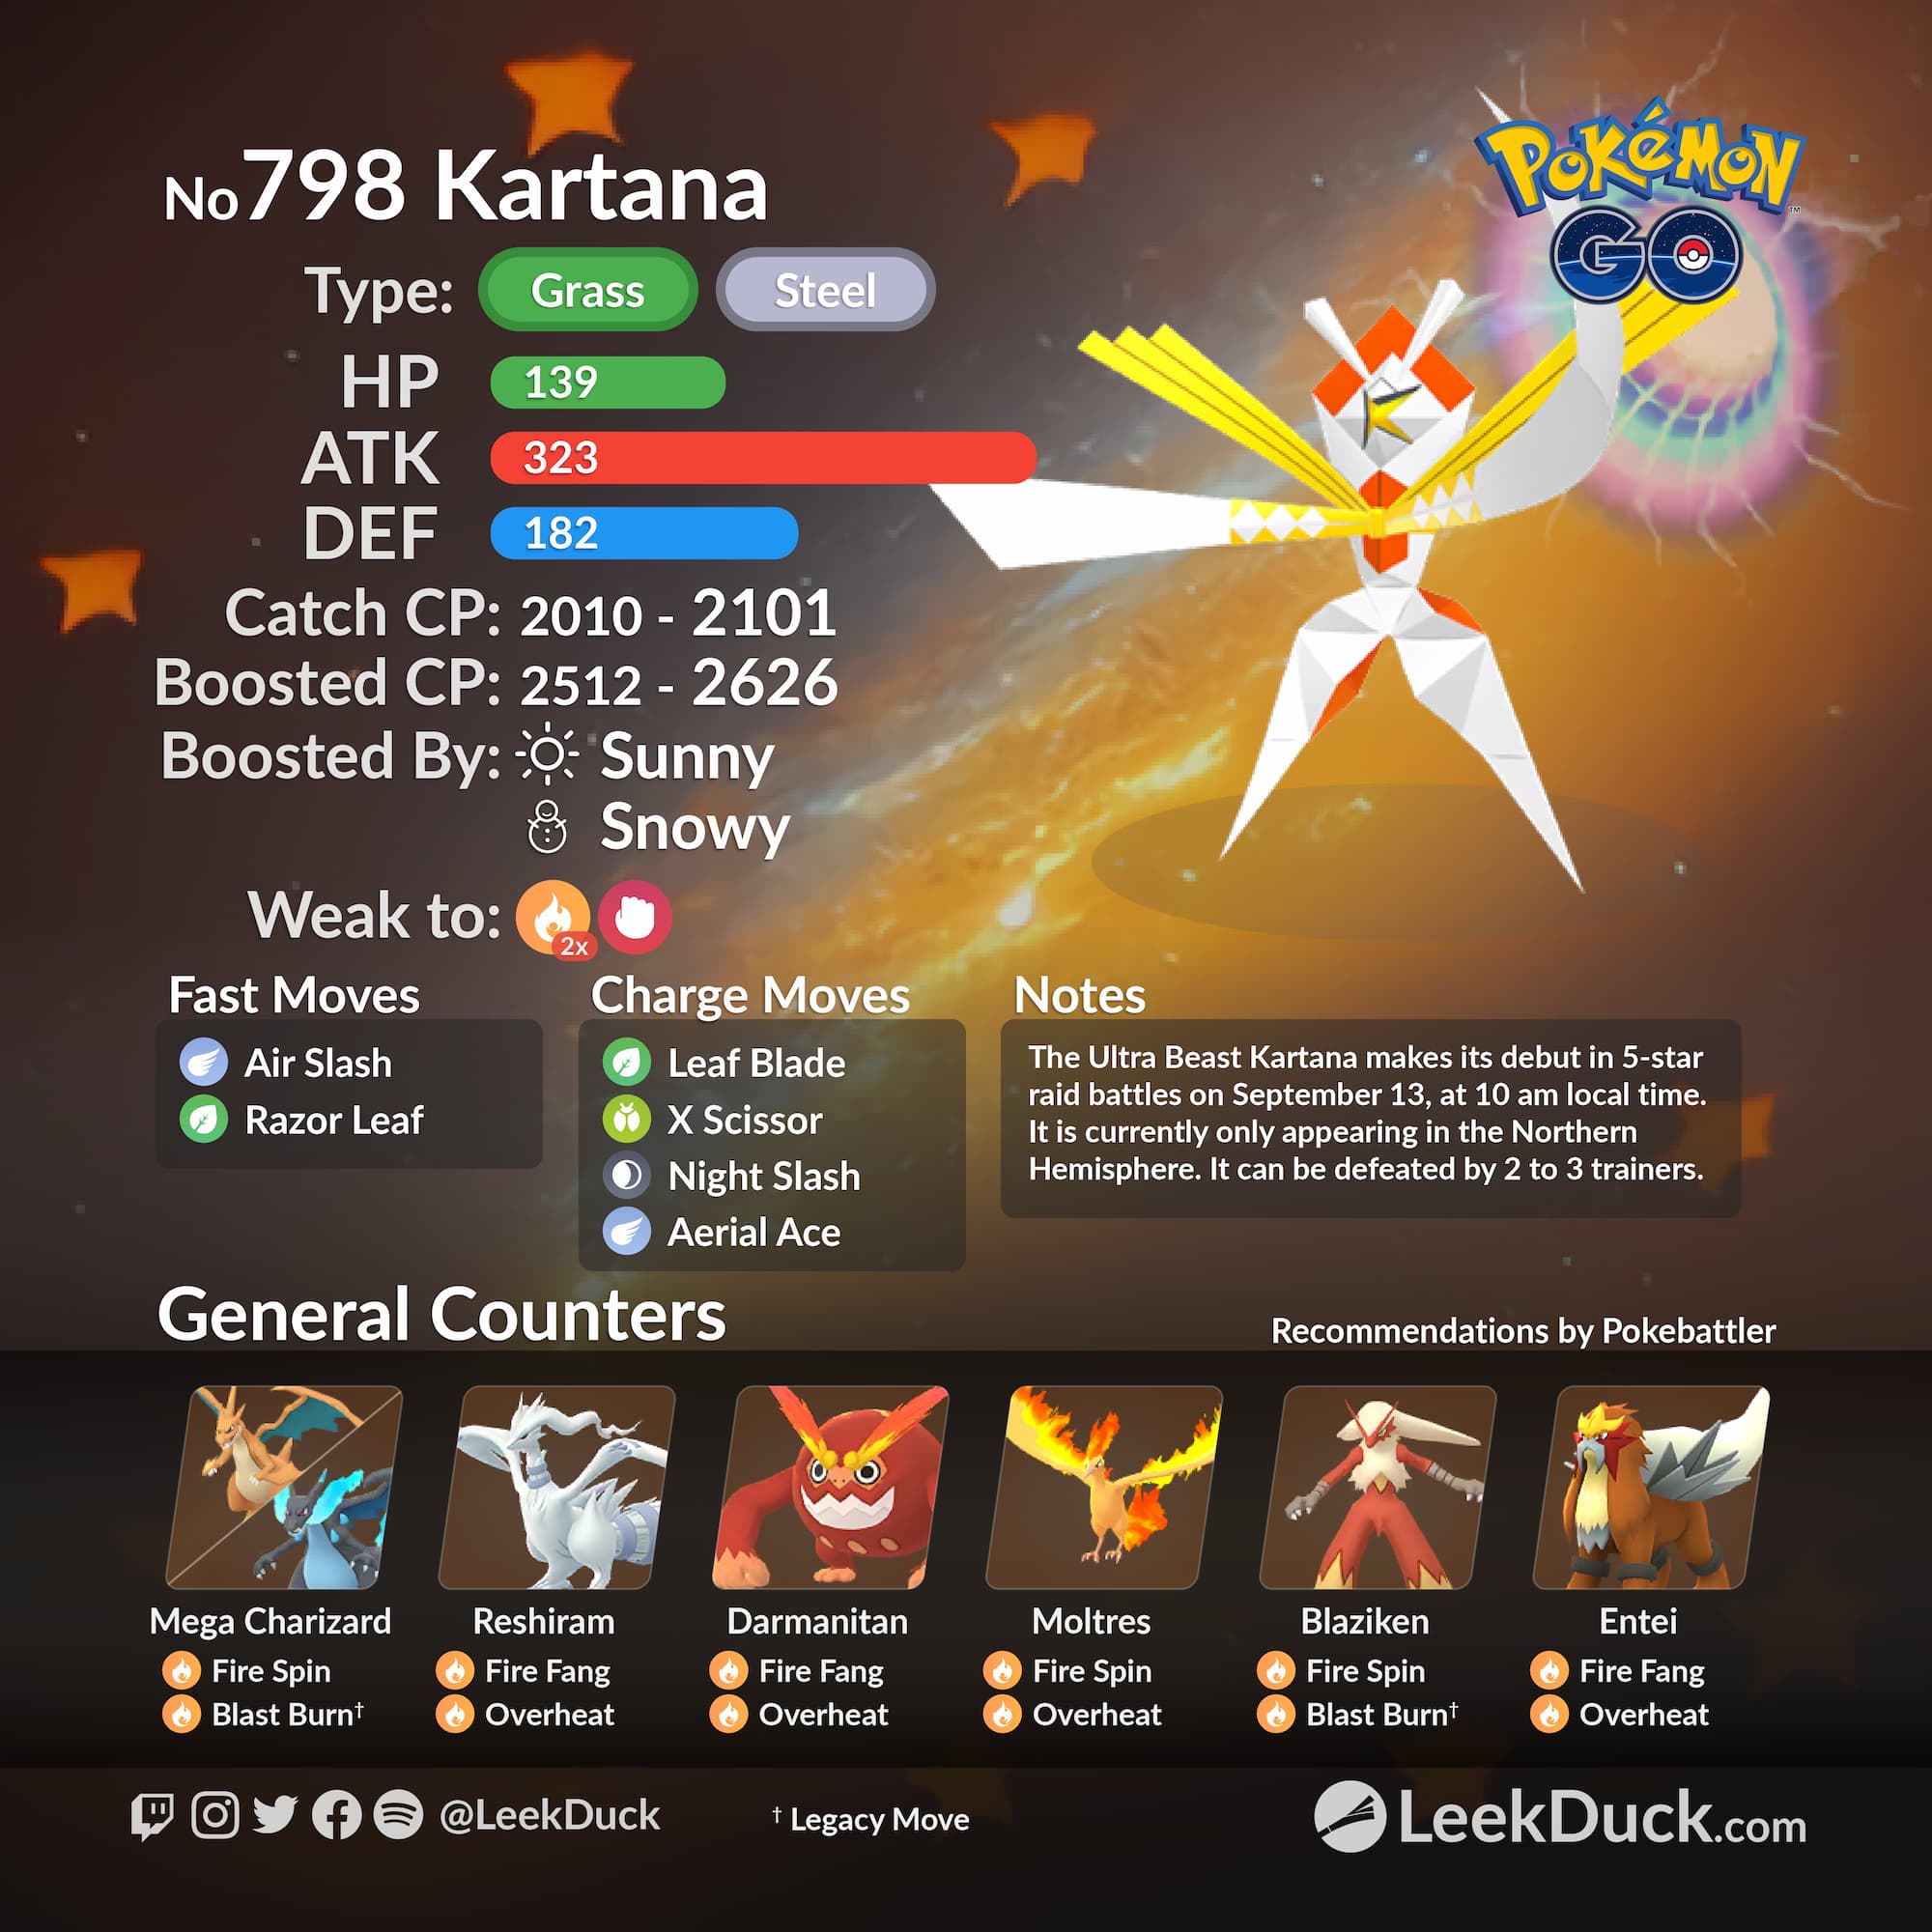 Leek Duck 🦆 on X: The Ultra Beast Celesteela makes its debut in 5-star  raids on September 13, at 10 am local time. It is currently only appearing  in the Southern Hemisphere.